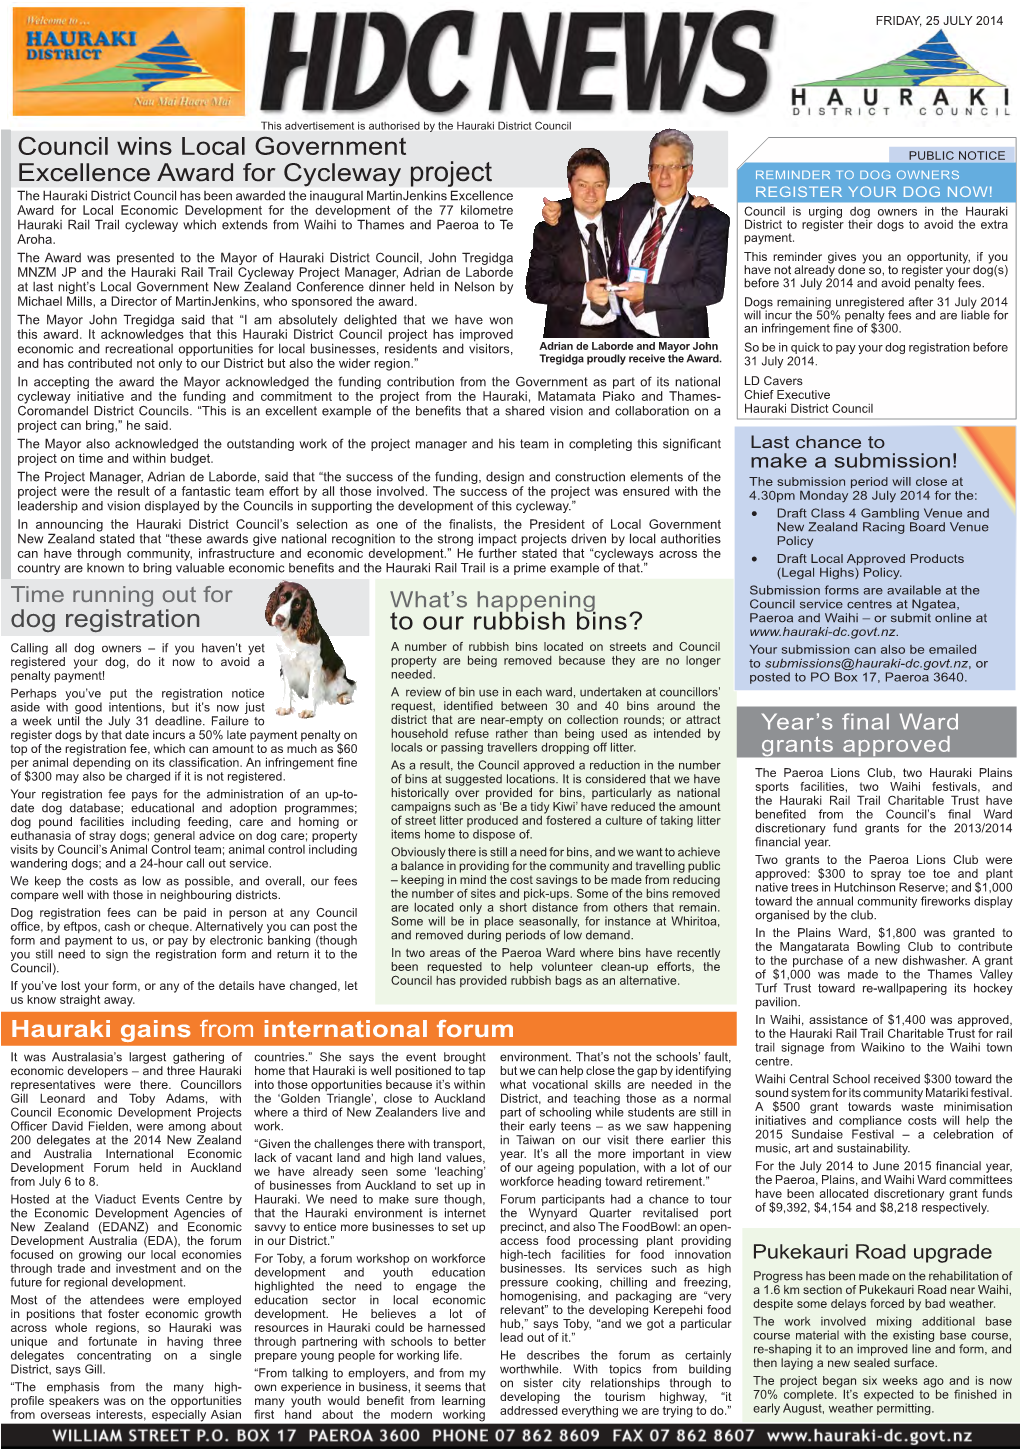 HDC News 25 July 2014.Indd